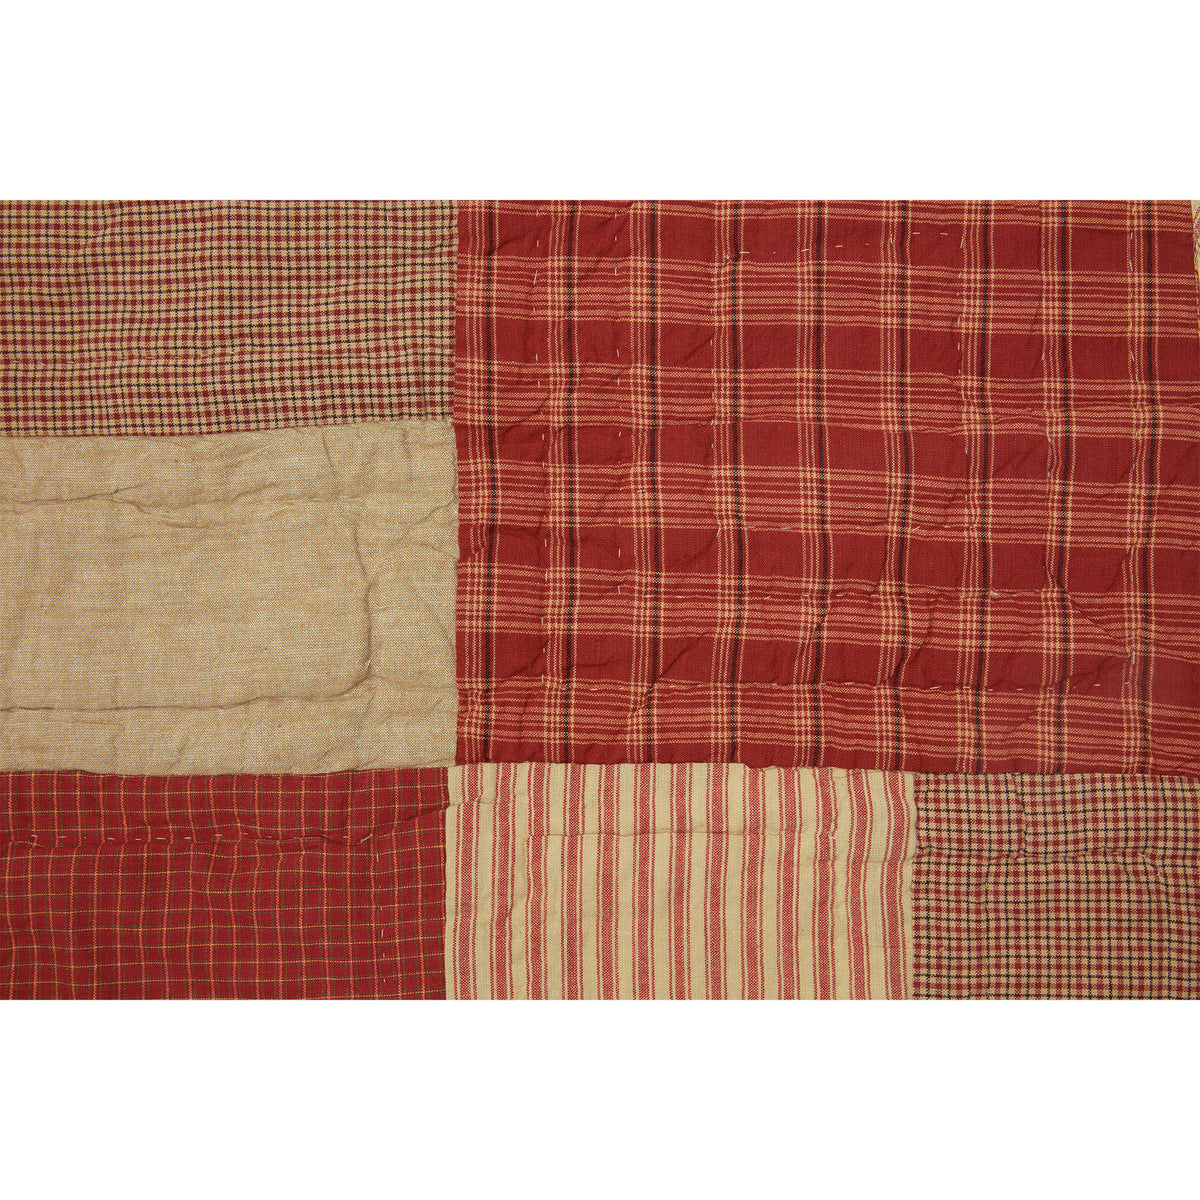 April & Olive Rory Schoolhouse Red Luxury King Quilt 120Wx105L By VHC Brands